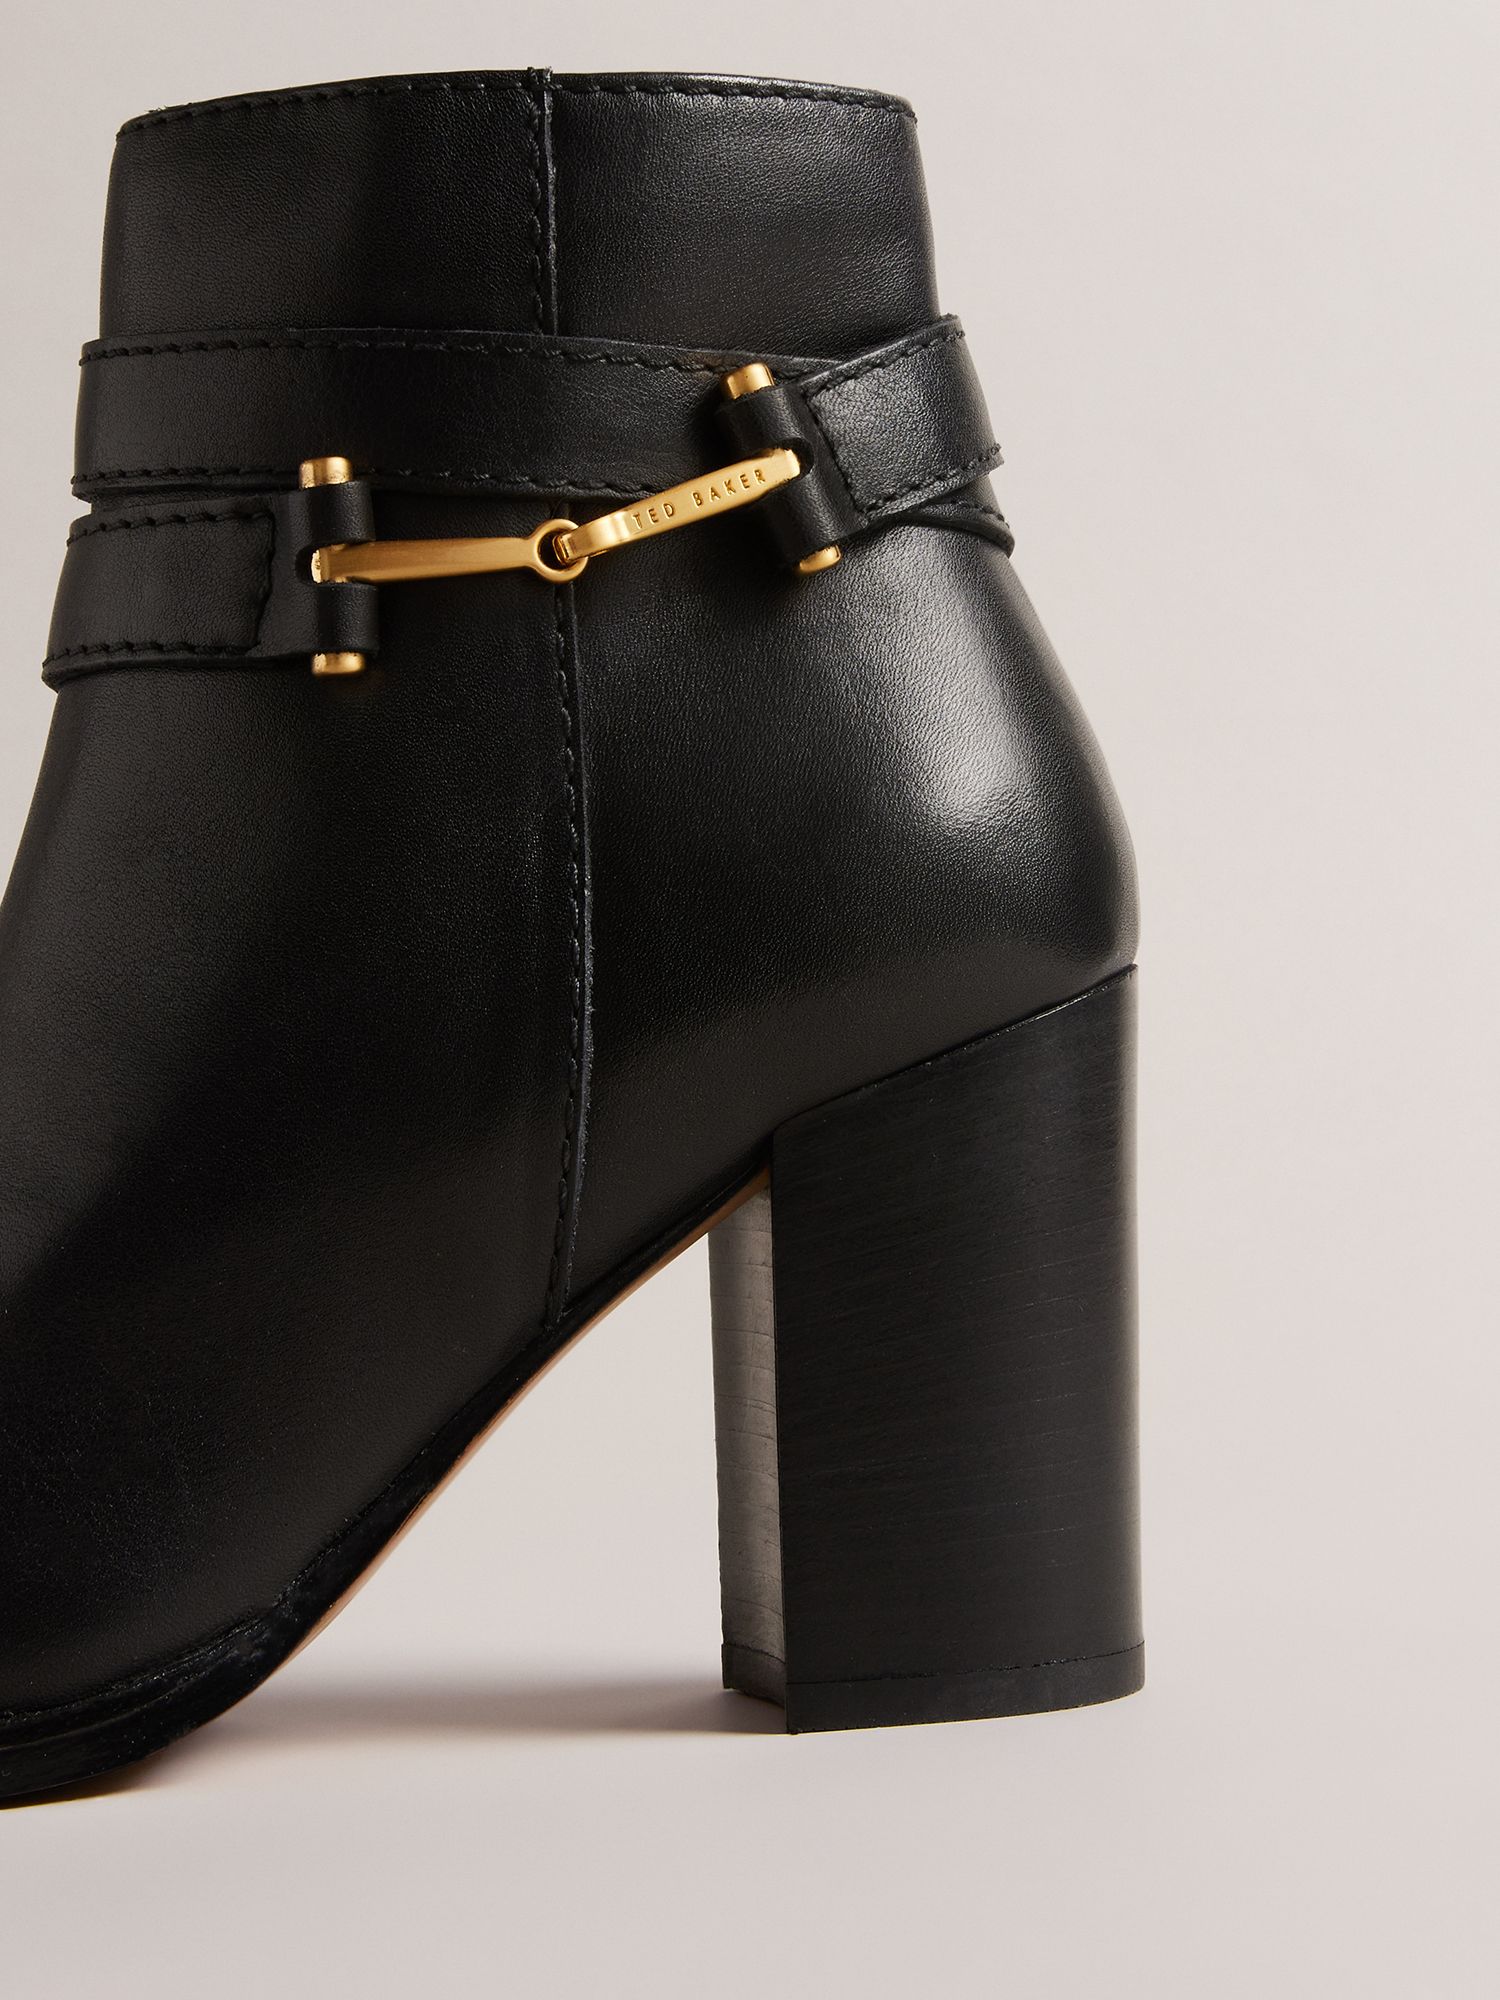 Buy Ted Baker Anisea High Block Heel Leather Ankle Boots Online at johnlewis.com